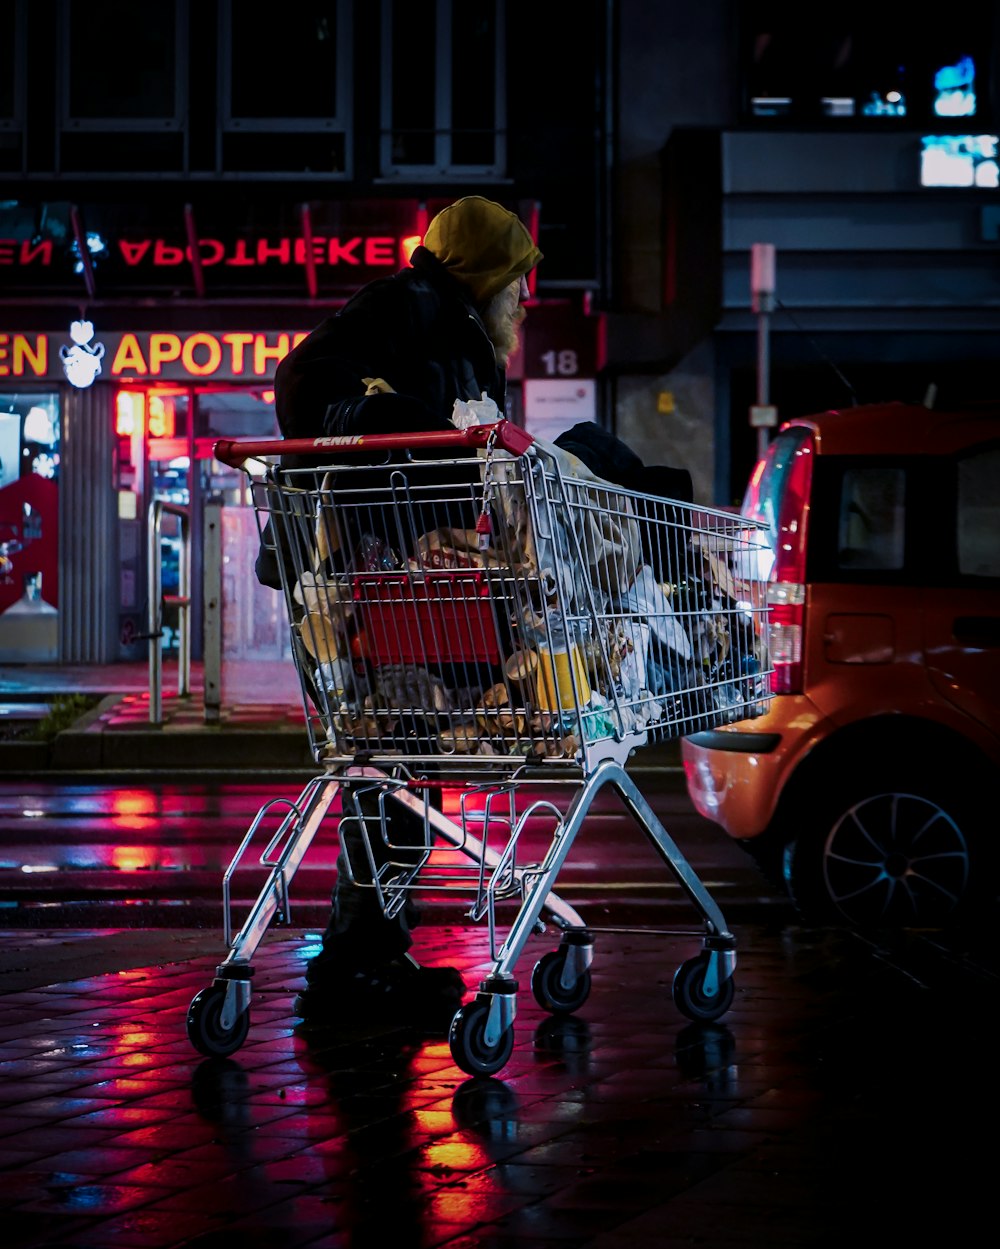 woman in black jacket riding red and silver shopping cart